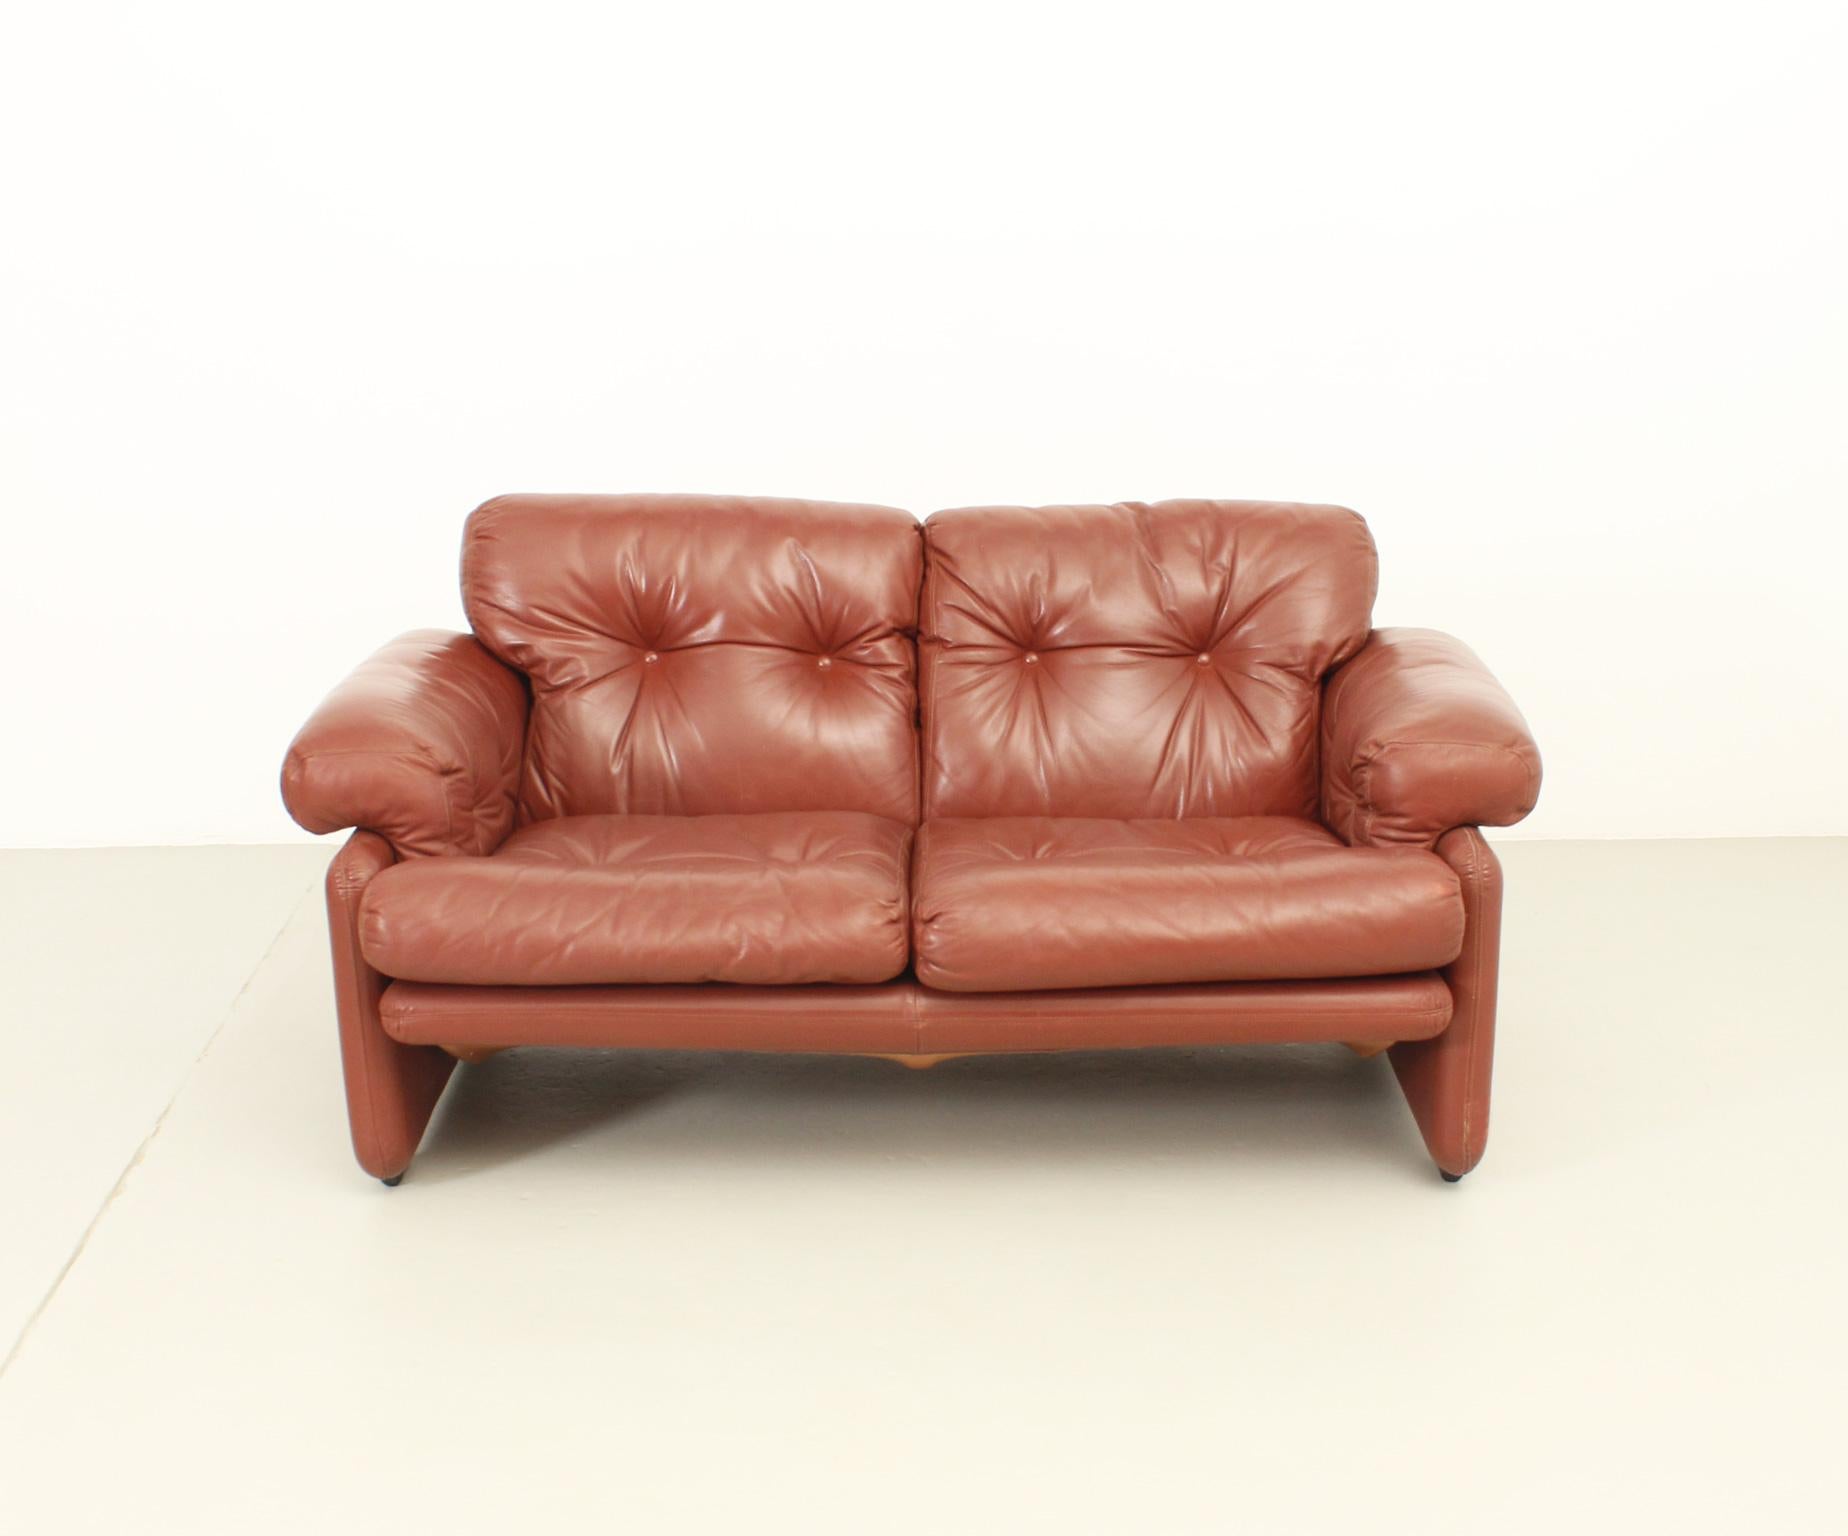 Mid-20th Century Coronado Two-seater Sofa by Tobia Scarpa in Cognac Leather, 1969 For Sale